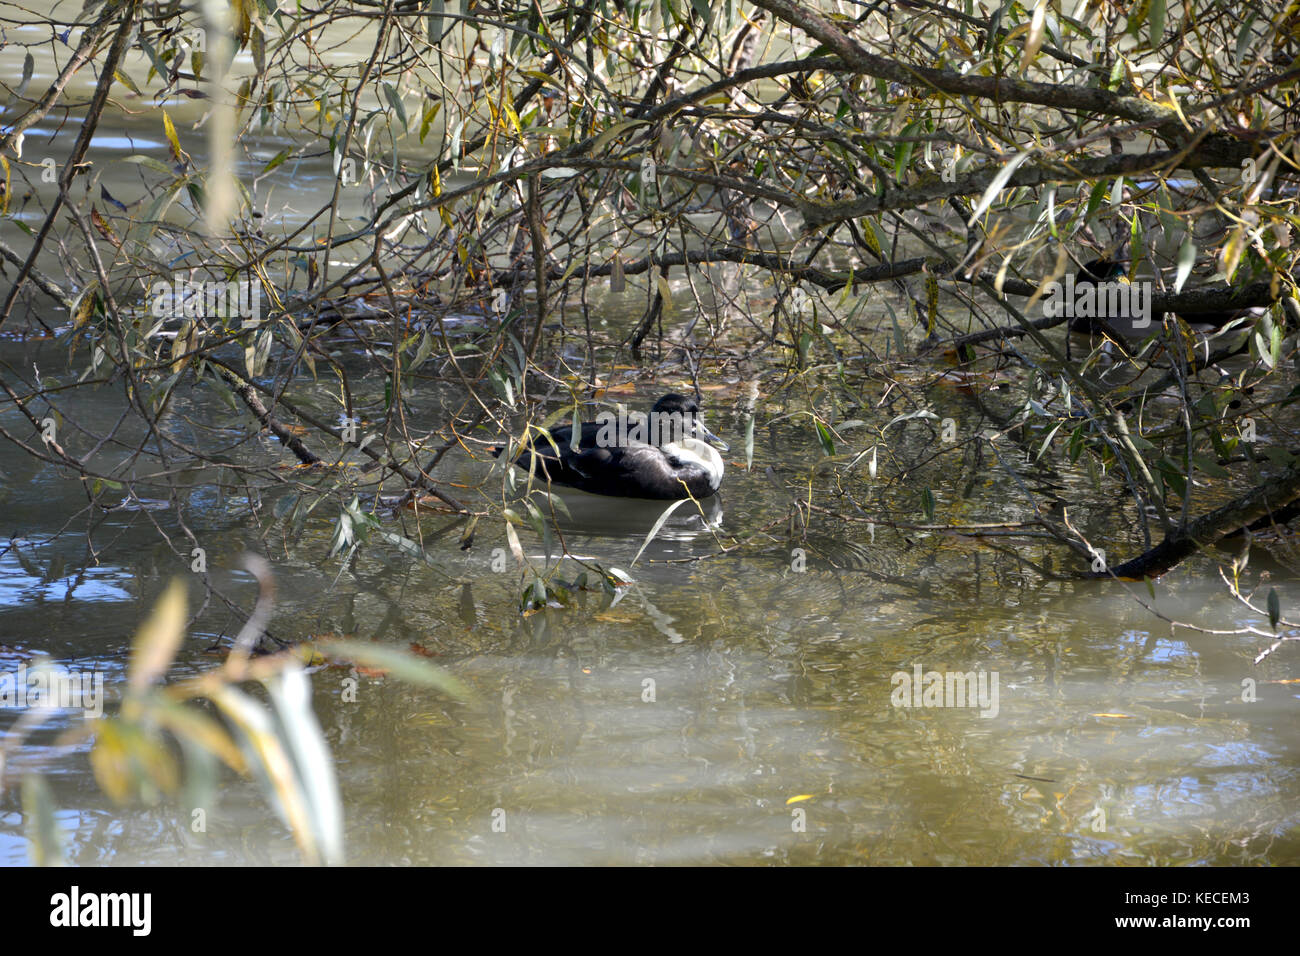 A duck swims in the lake under branches through Stock Photo